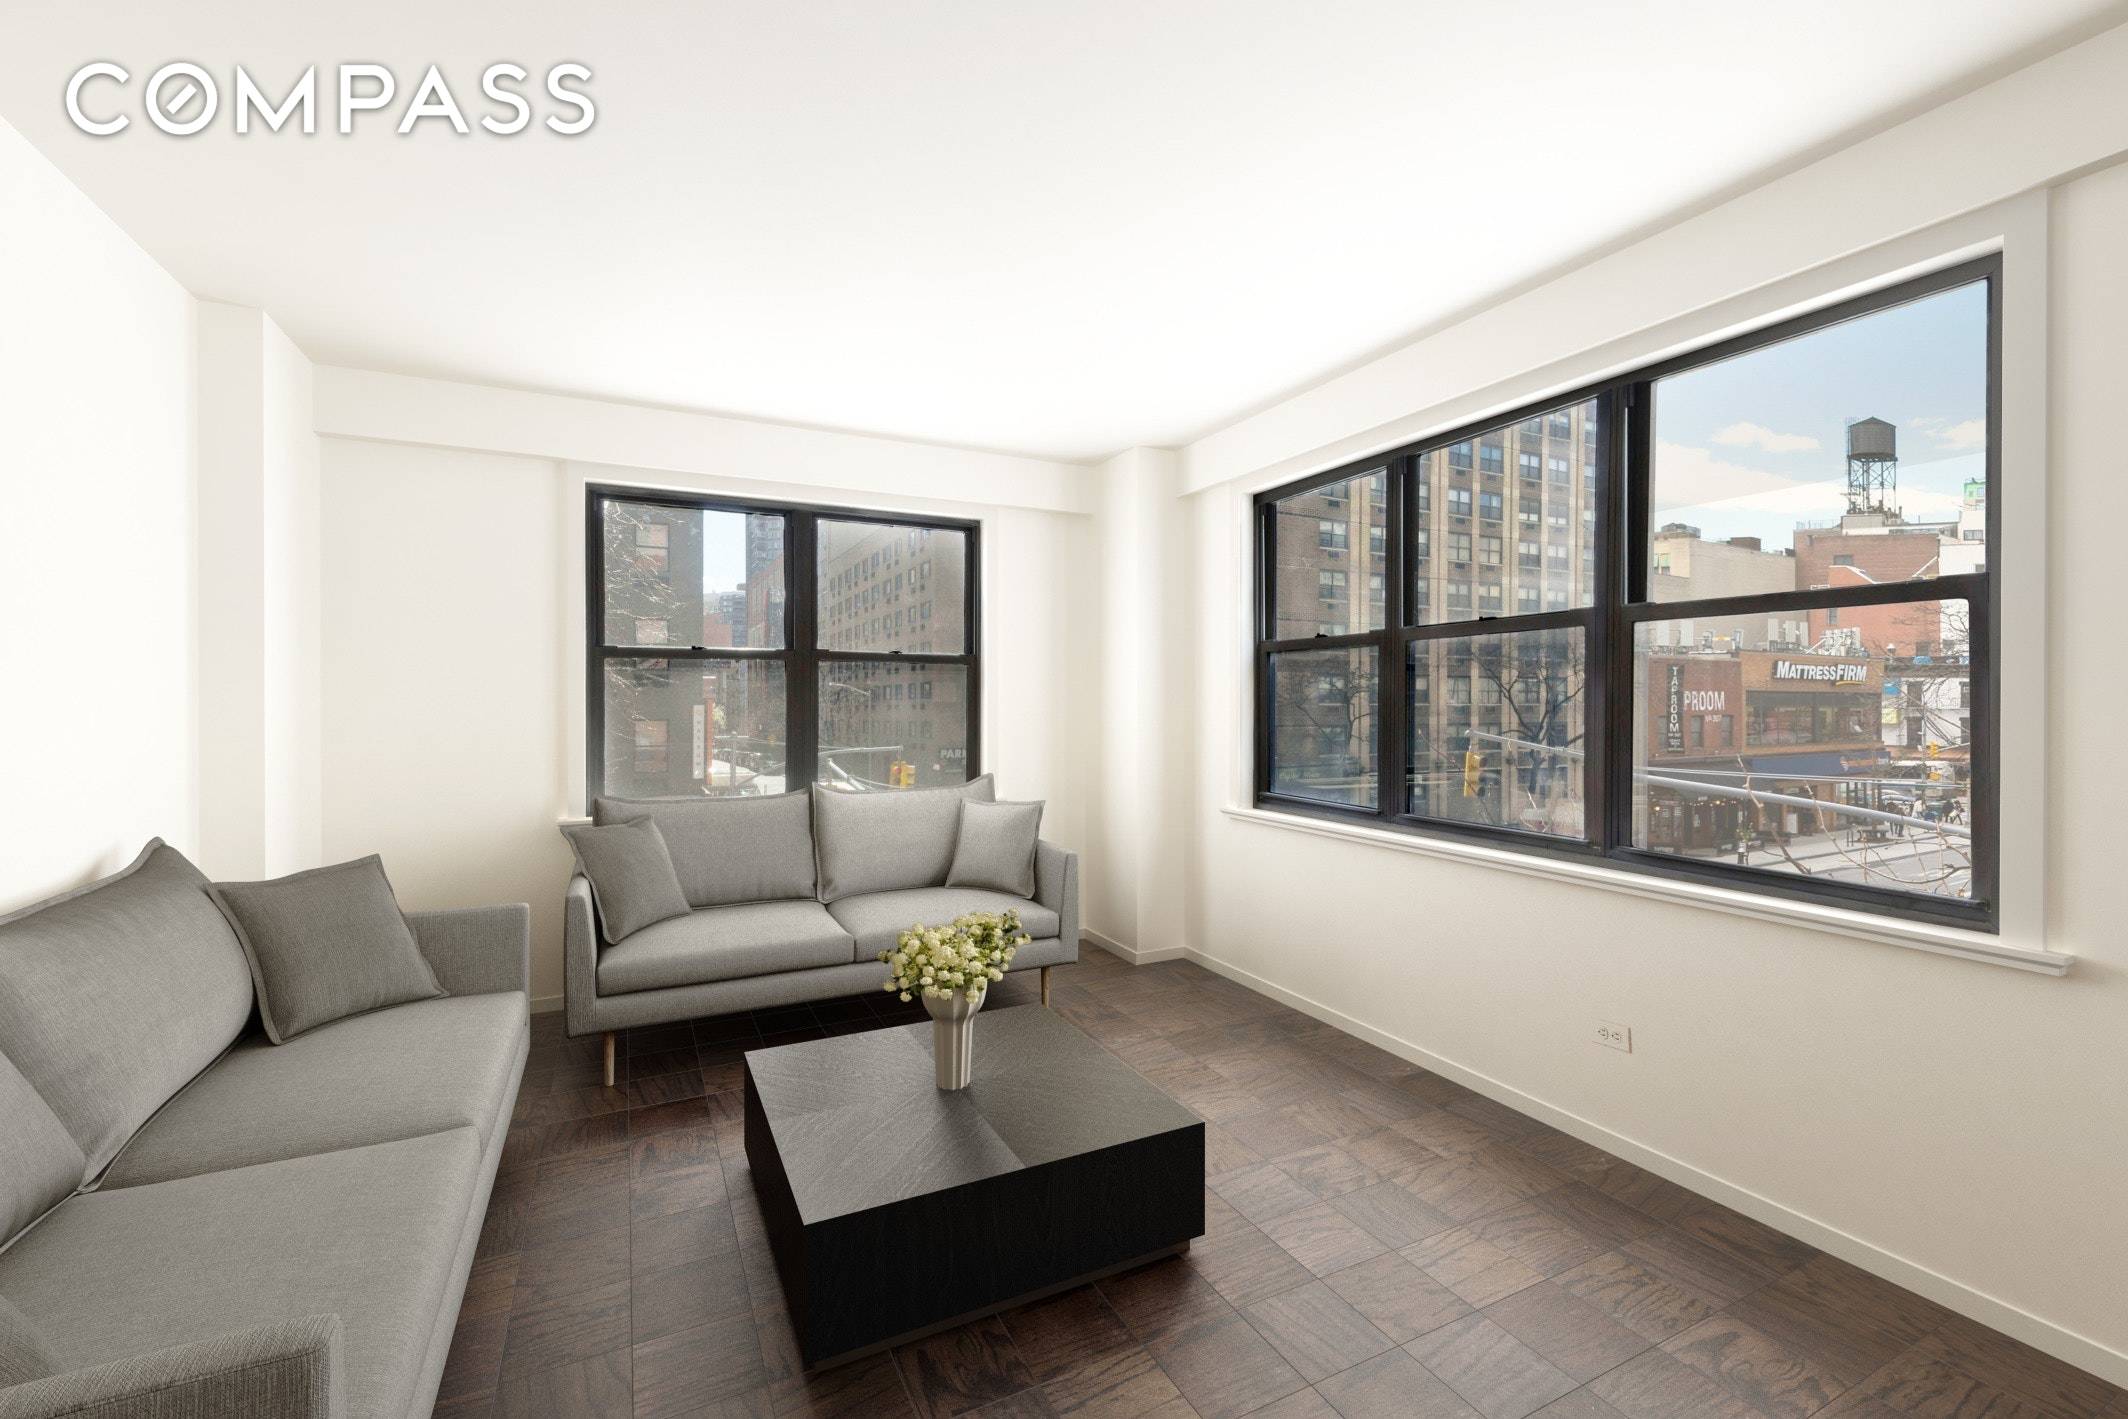 This rarely available corner apartment awaits your personal touch.